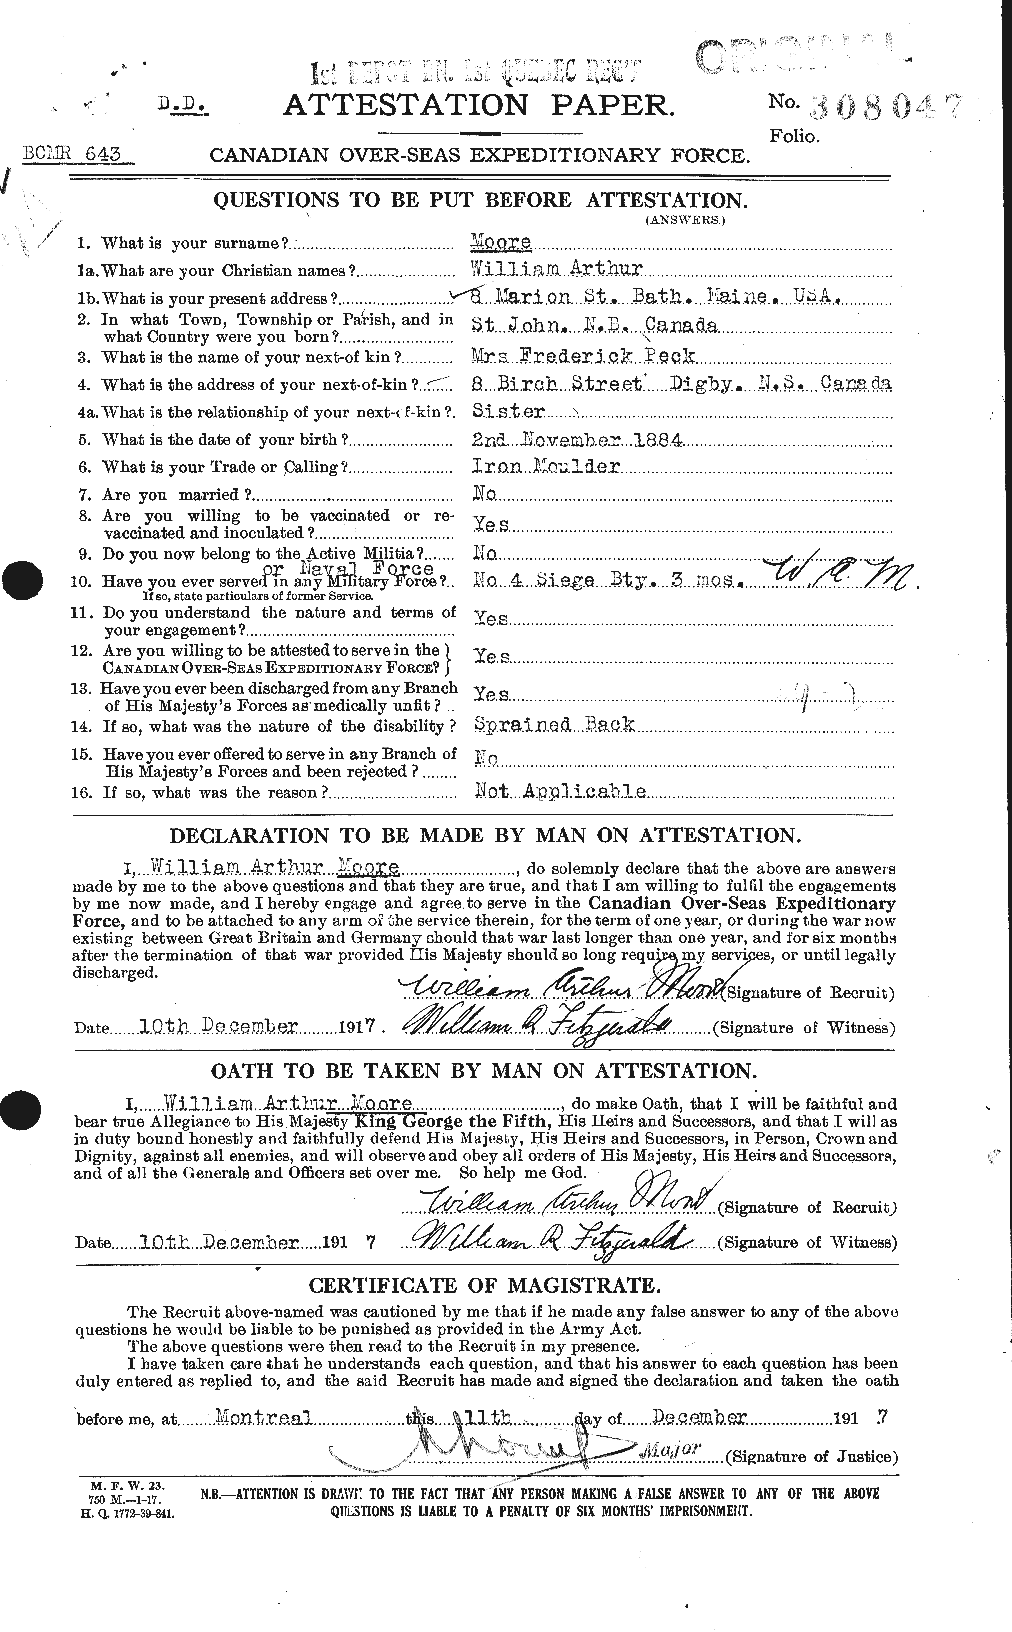 Personnel Records of the First World War - CEF 505774a